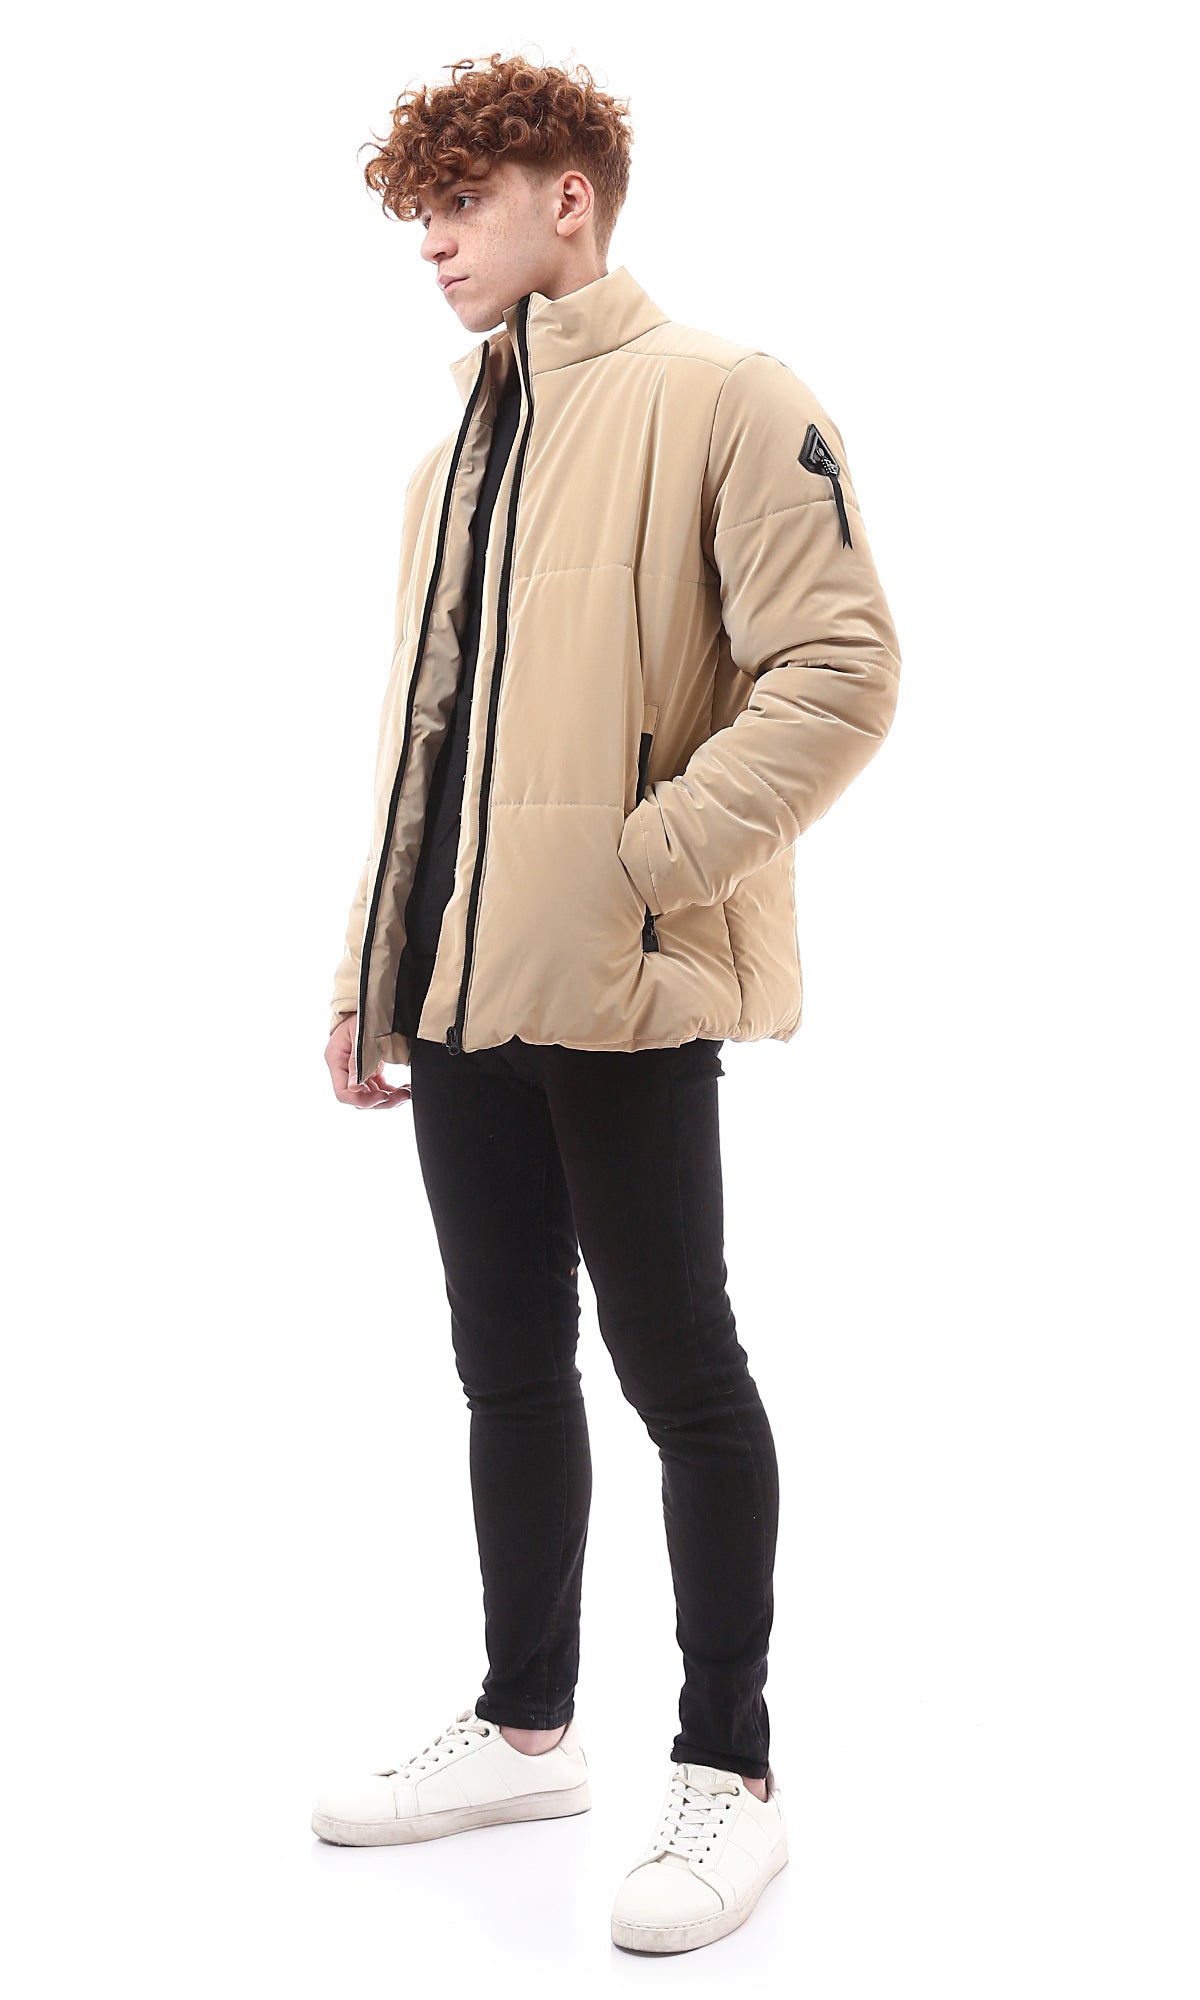 O174074 Stand Collar Long Sleeves Sand Beige Bomber Jacket